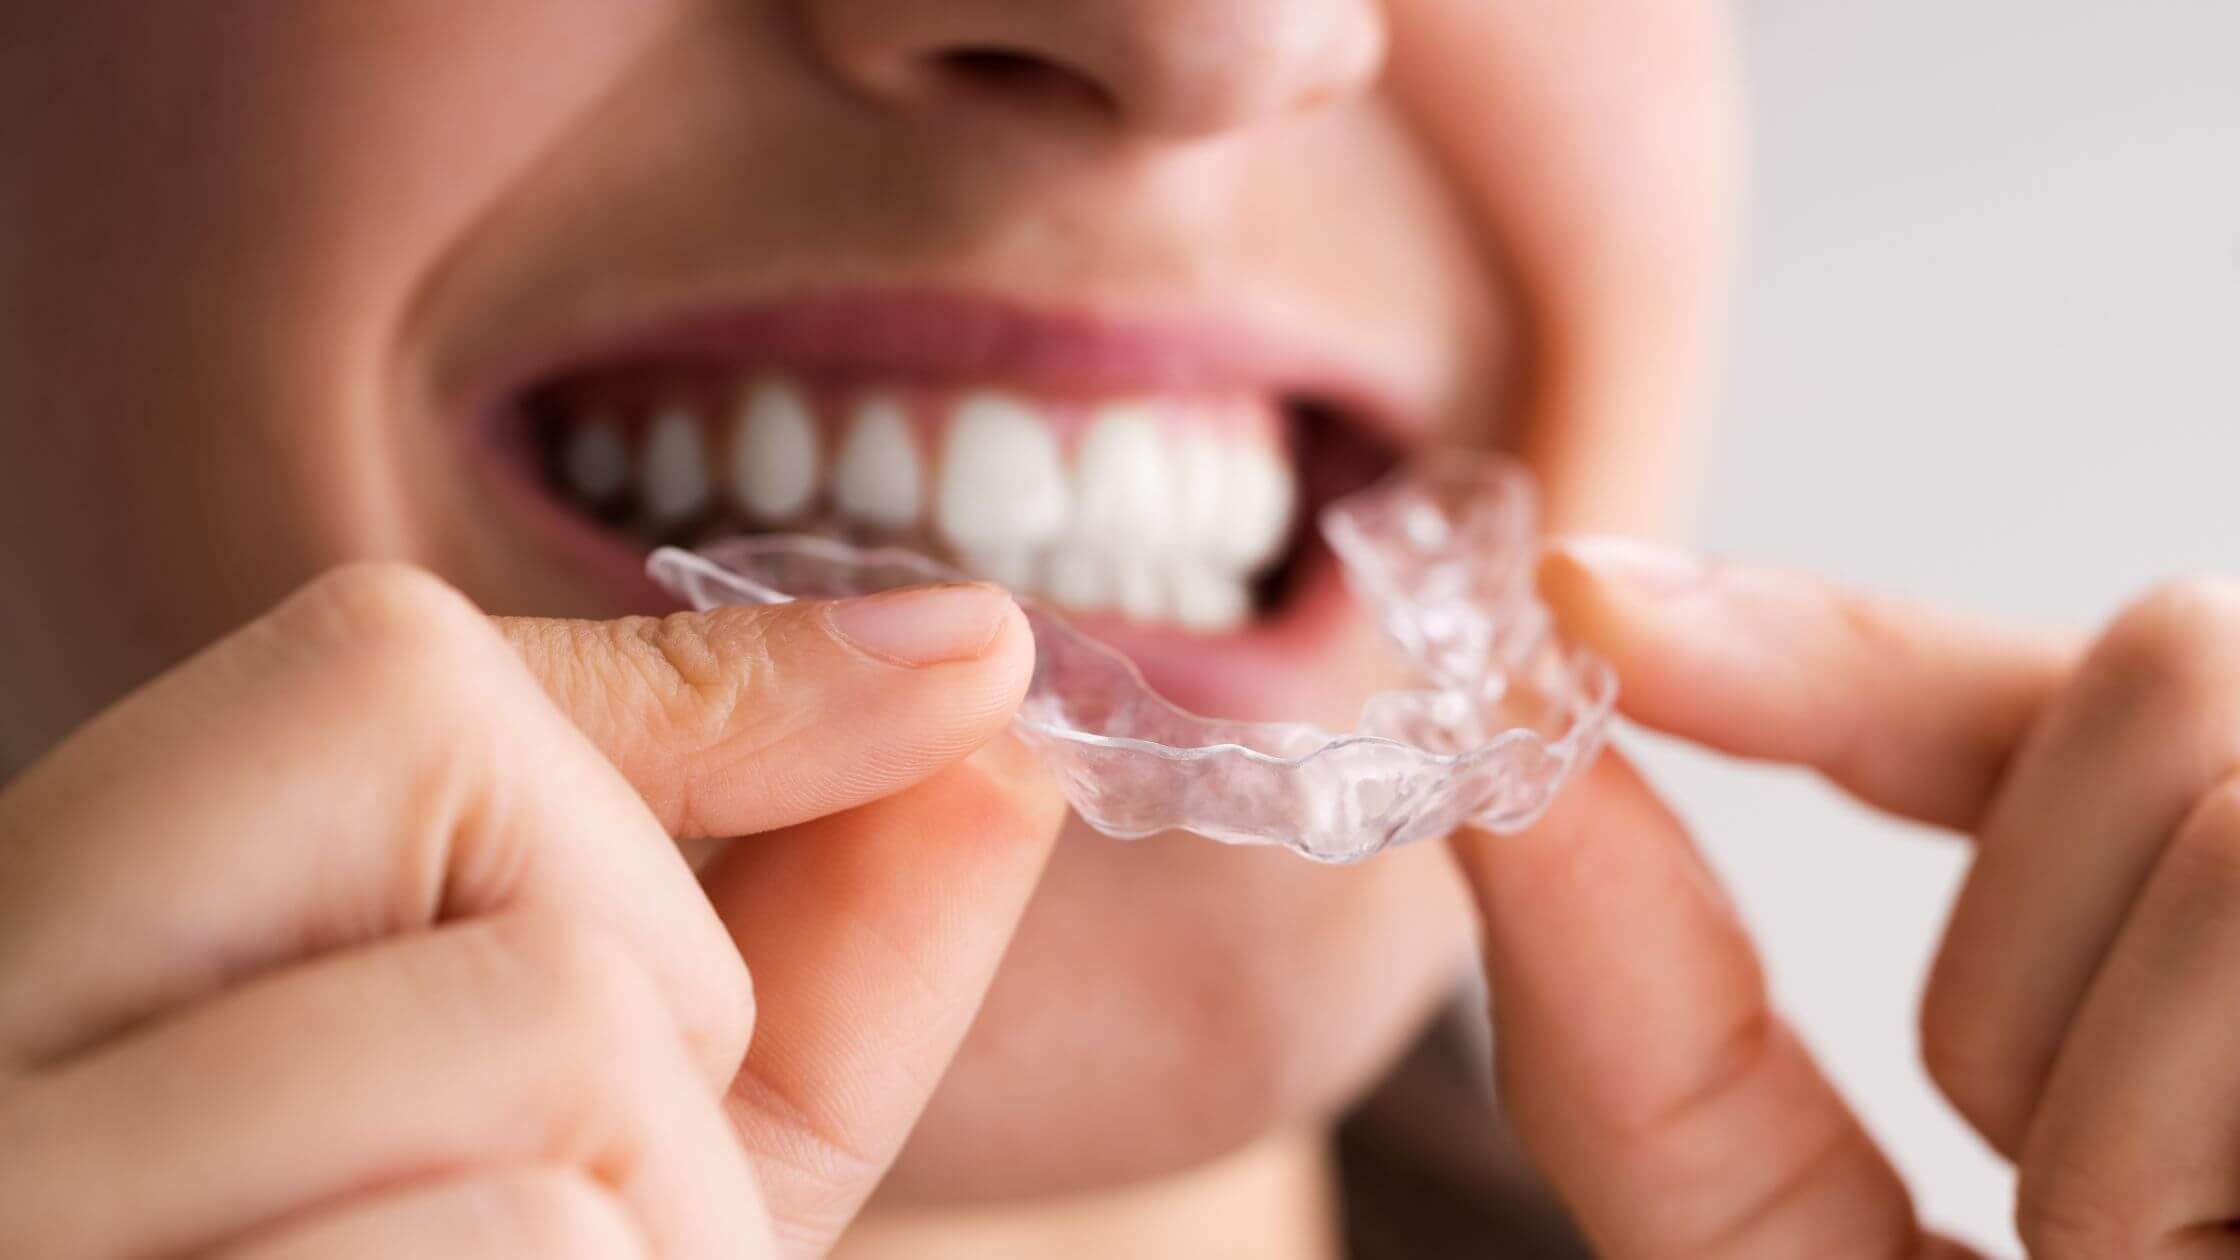 Some Questions that You Need to Ask Before Starting Your Clear Aligner Treatment